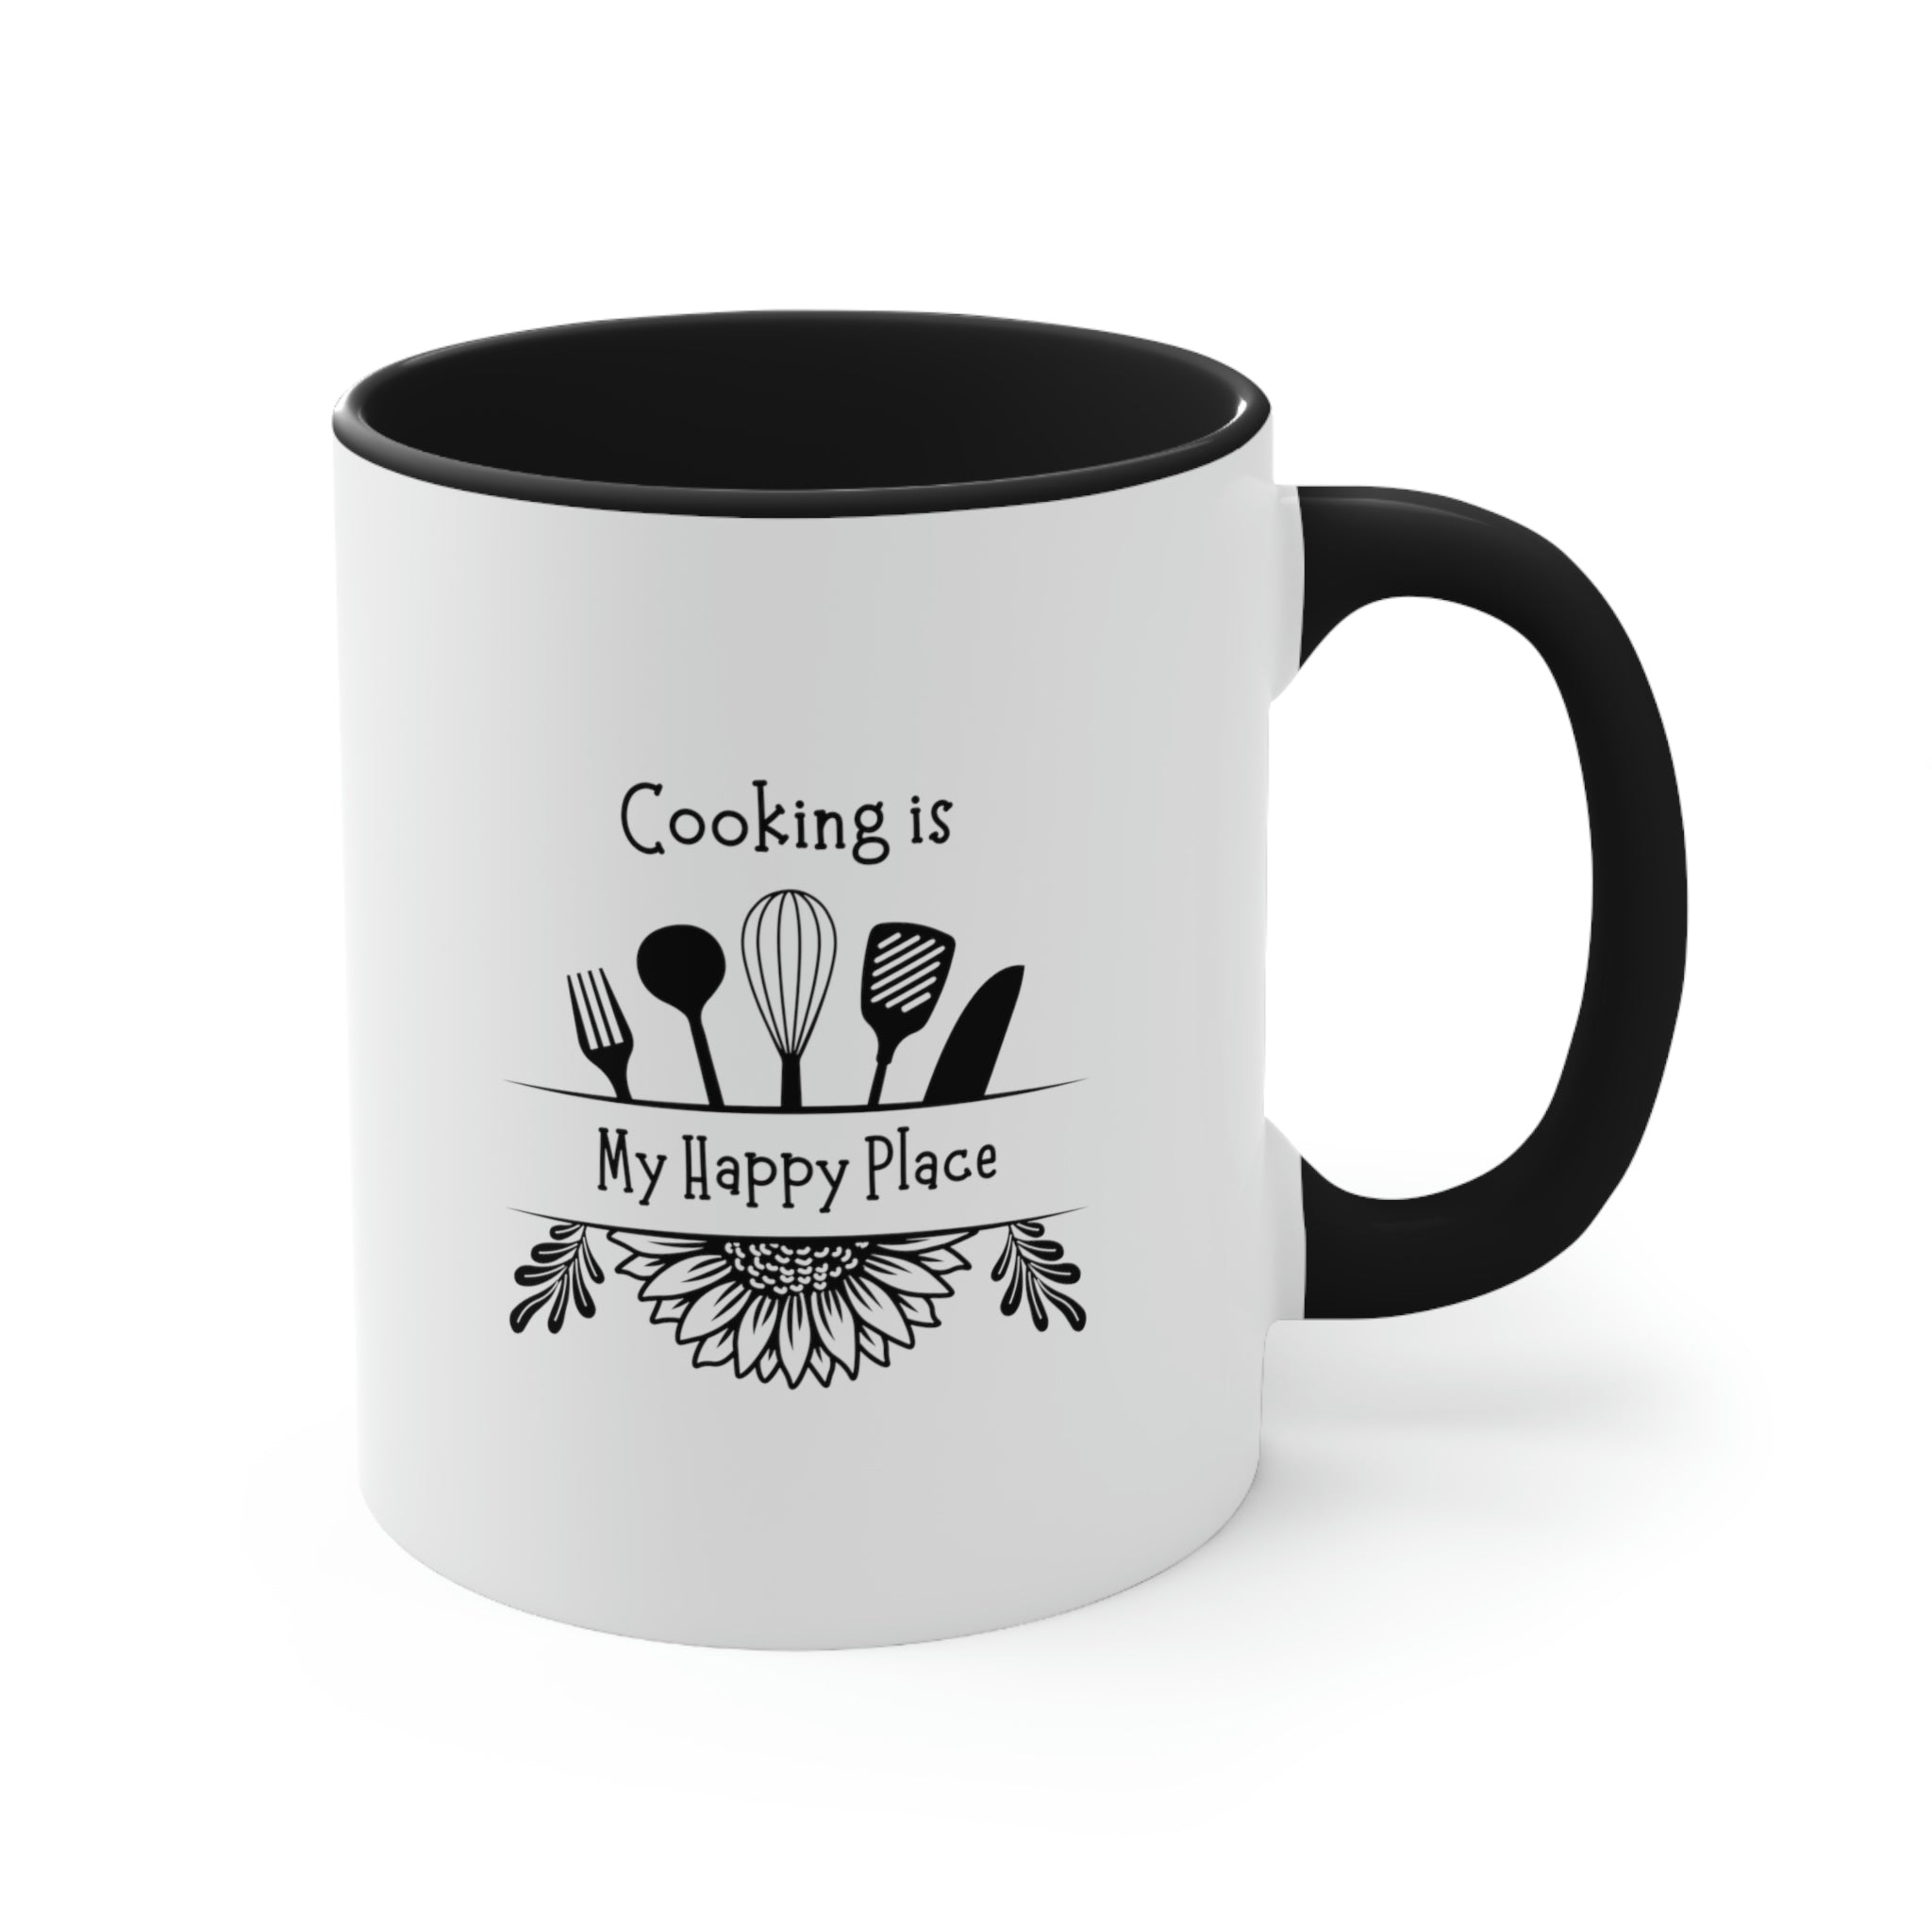 Coffee Mug, Cooking is My Happy Place 11oz Ceramic Mug with Light-Hearted Design, Dishwasher and Microwave Safe, Perfect Gift for Hot Beverage Lovers - cooking mug 3